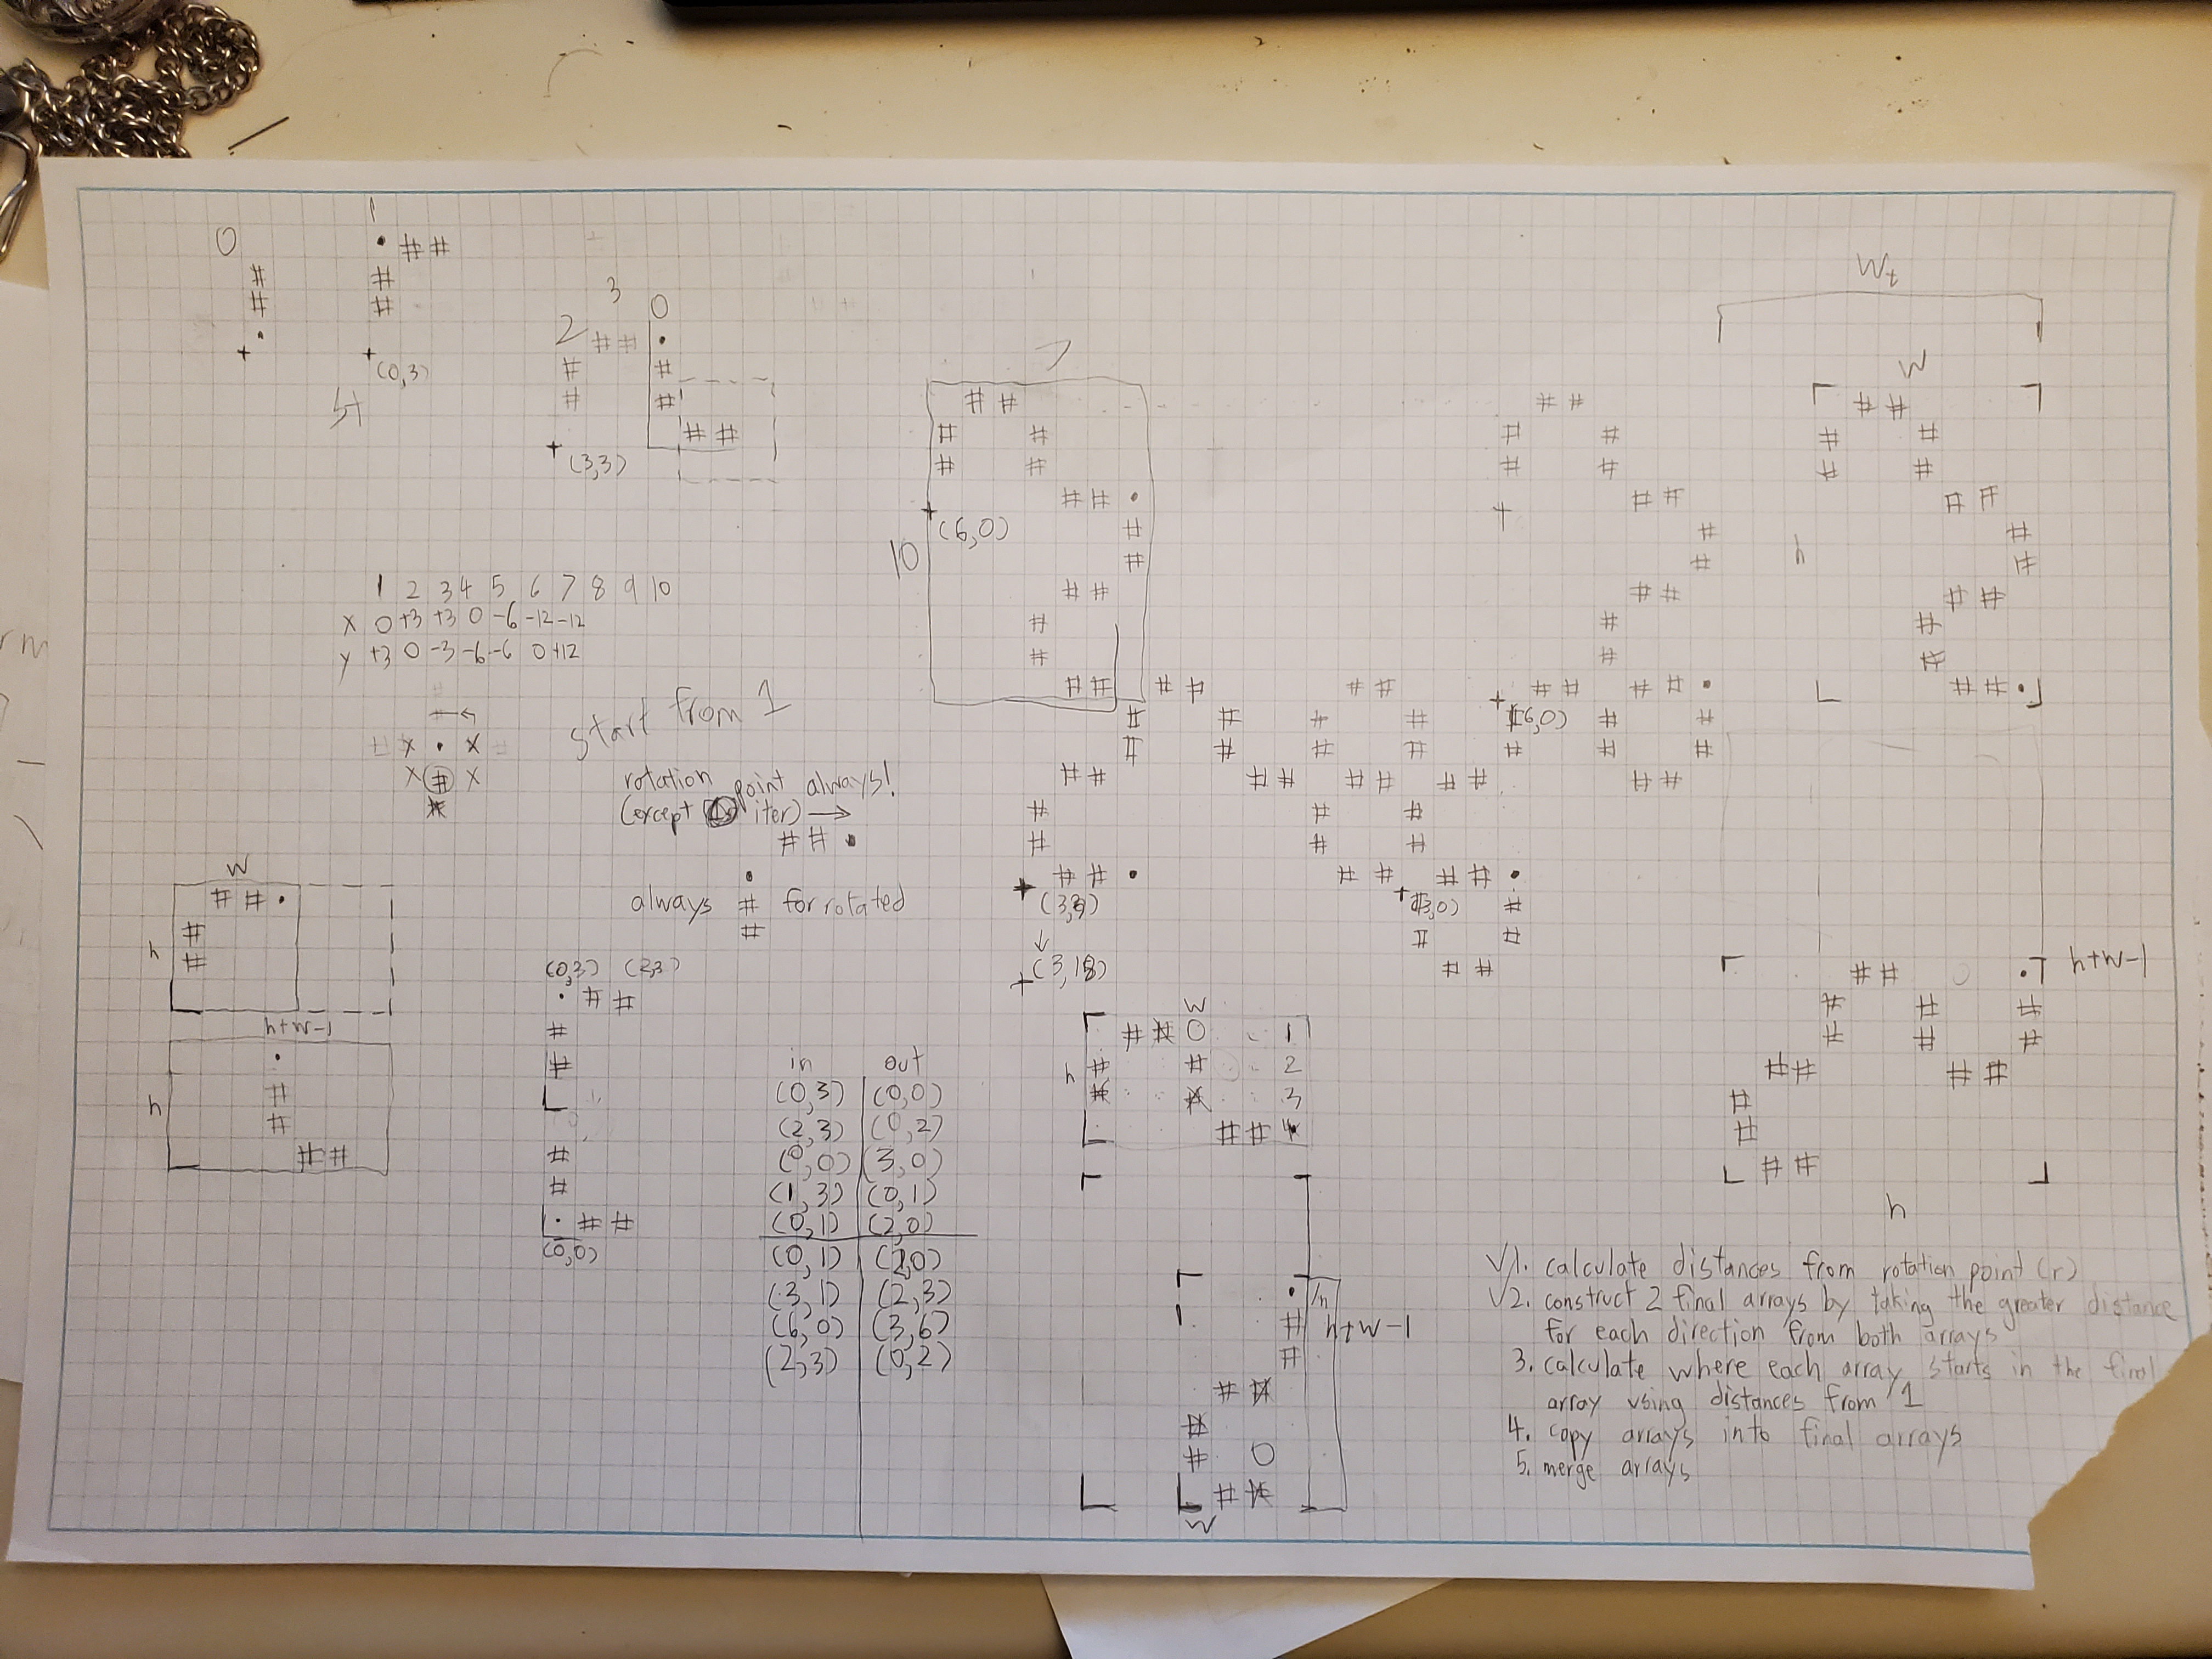 The work I did to figure out how to generate a dragon curve